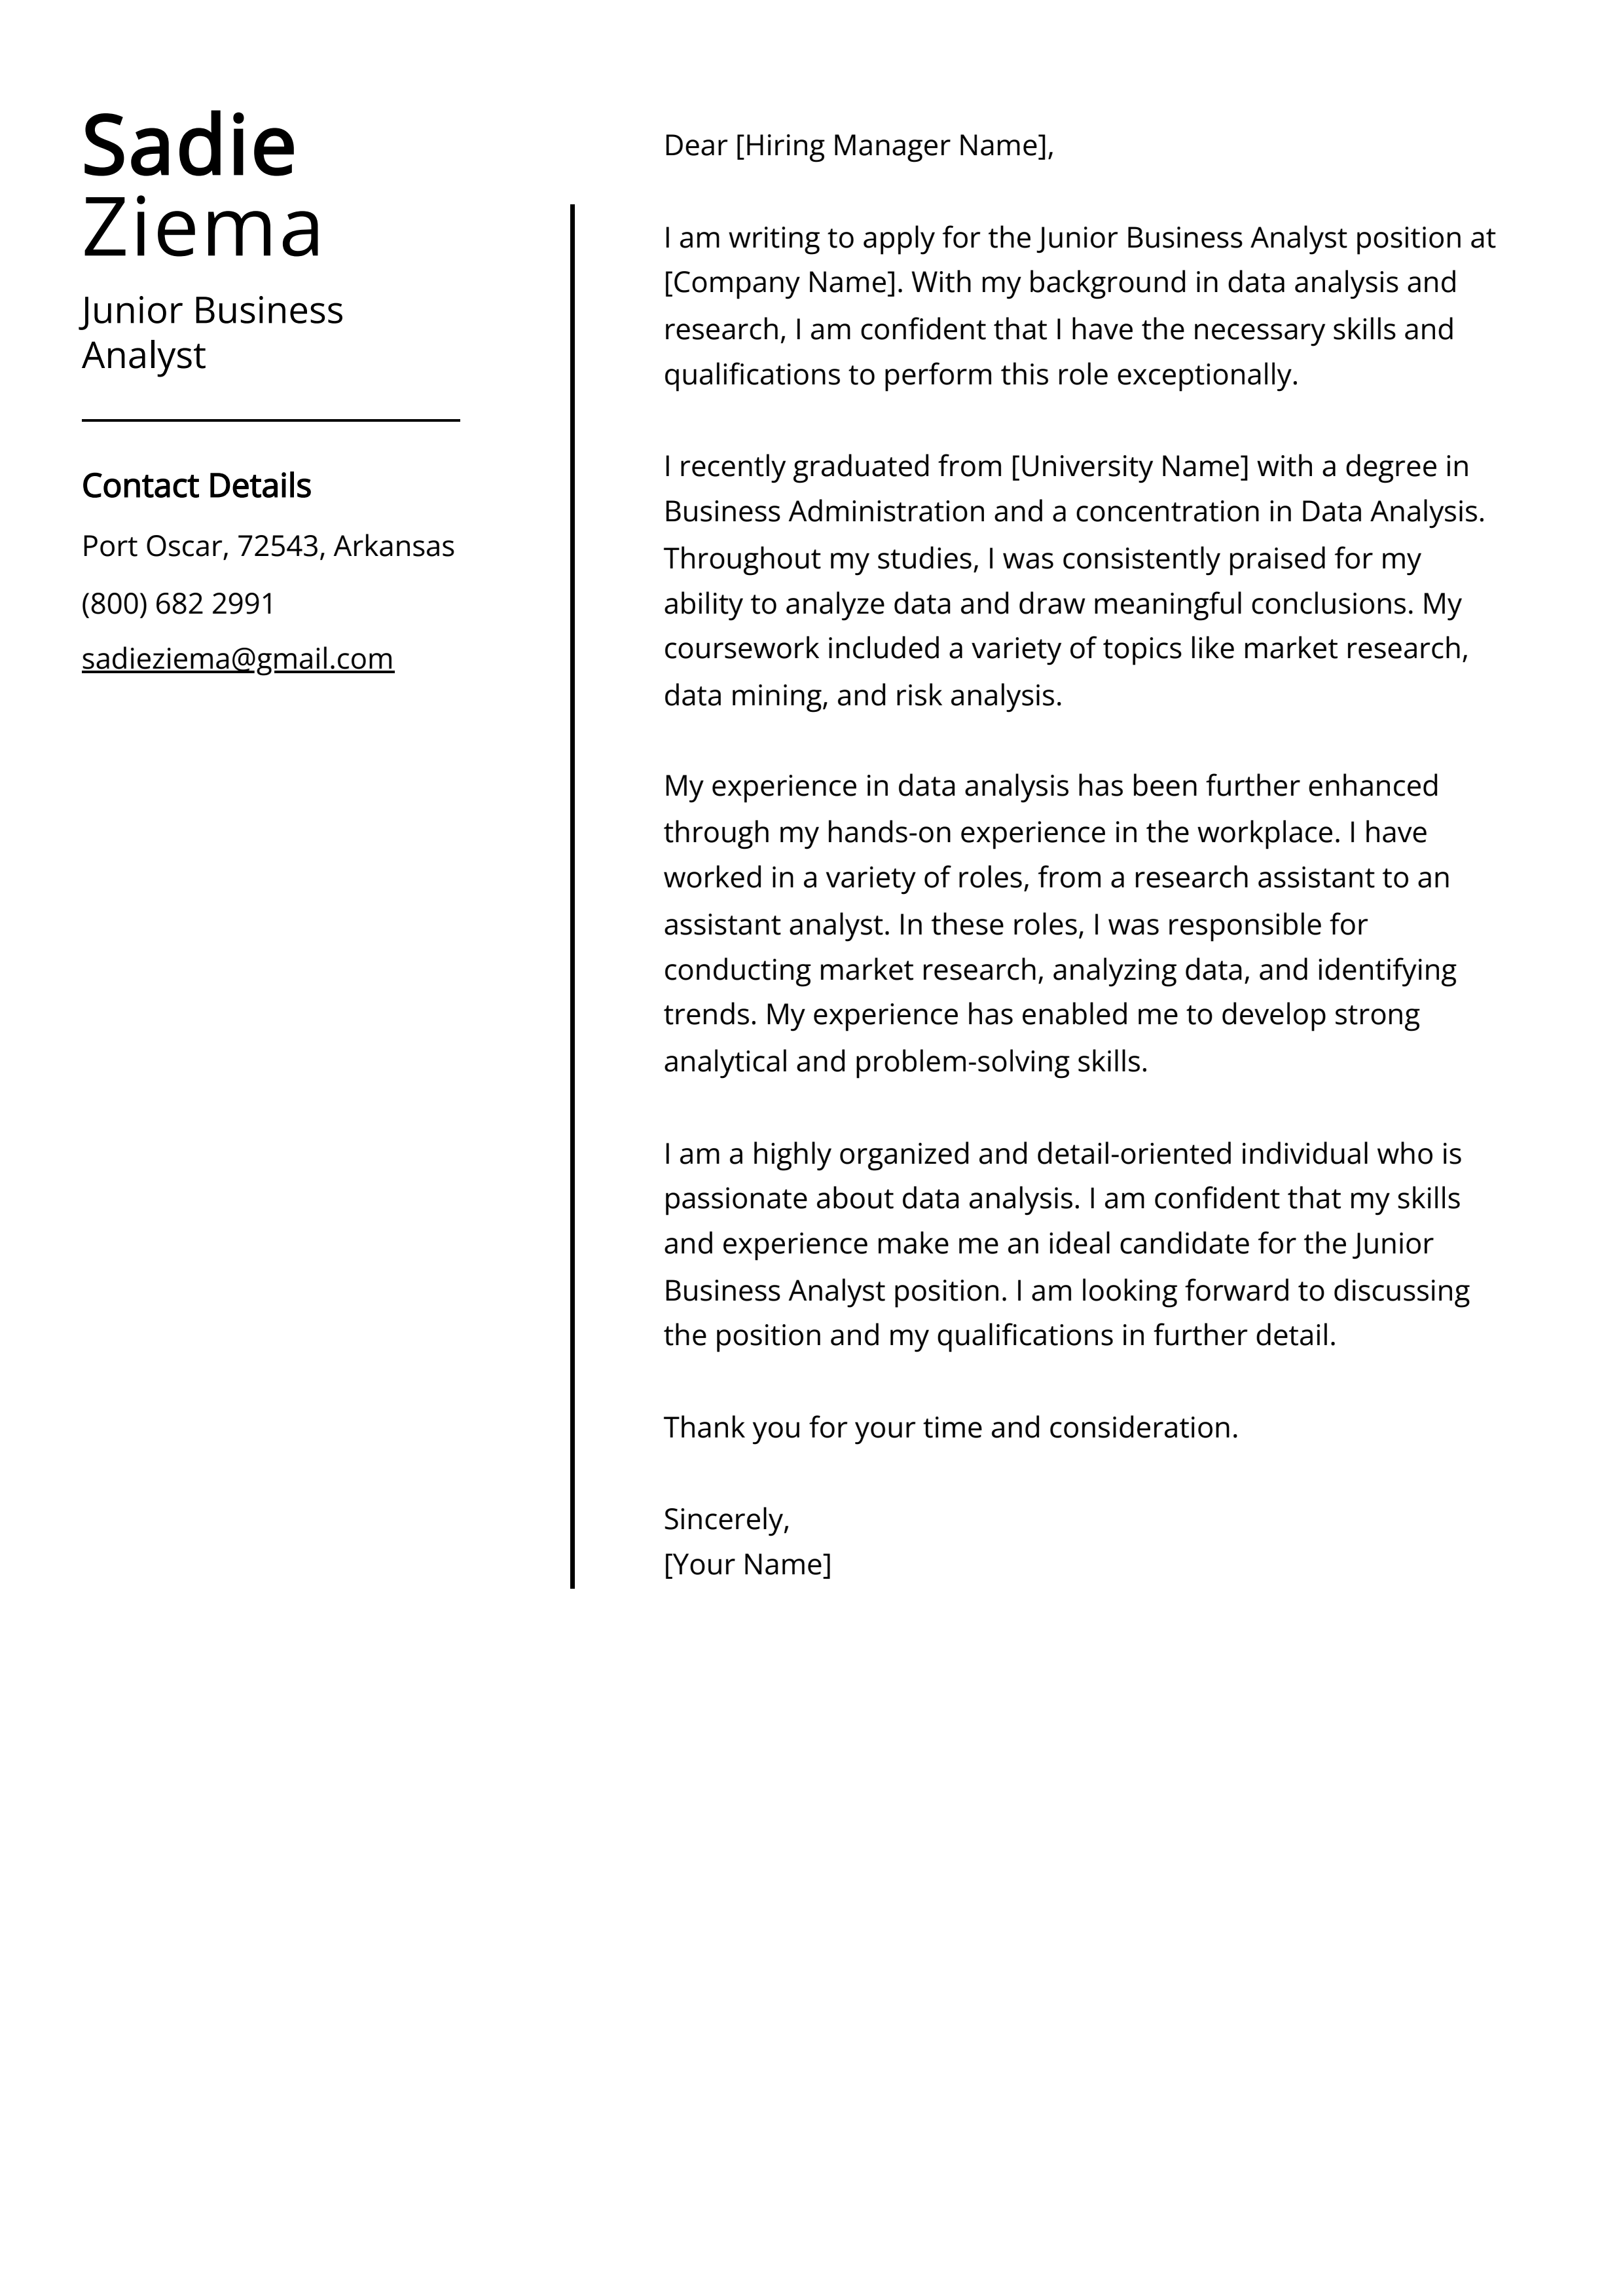 Junior Business Analyst Cover Letter Example